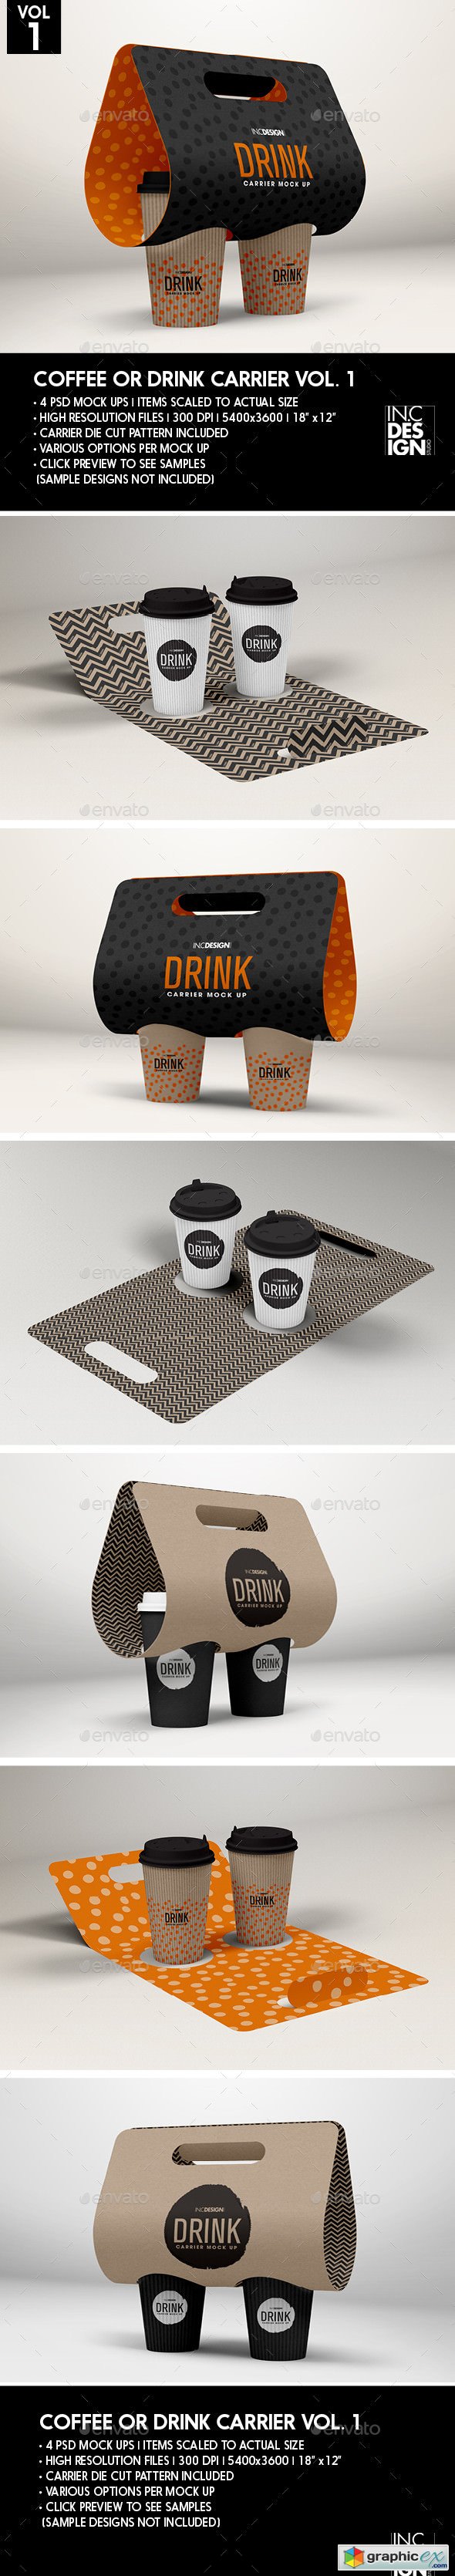 Coffee or Drink Take out Carrier Vol1 Packaging Mock Up